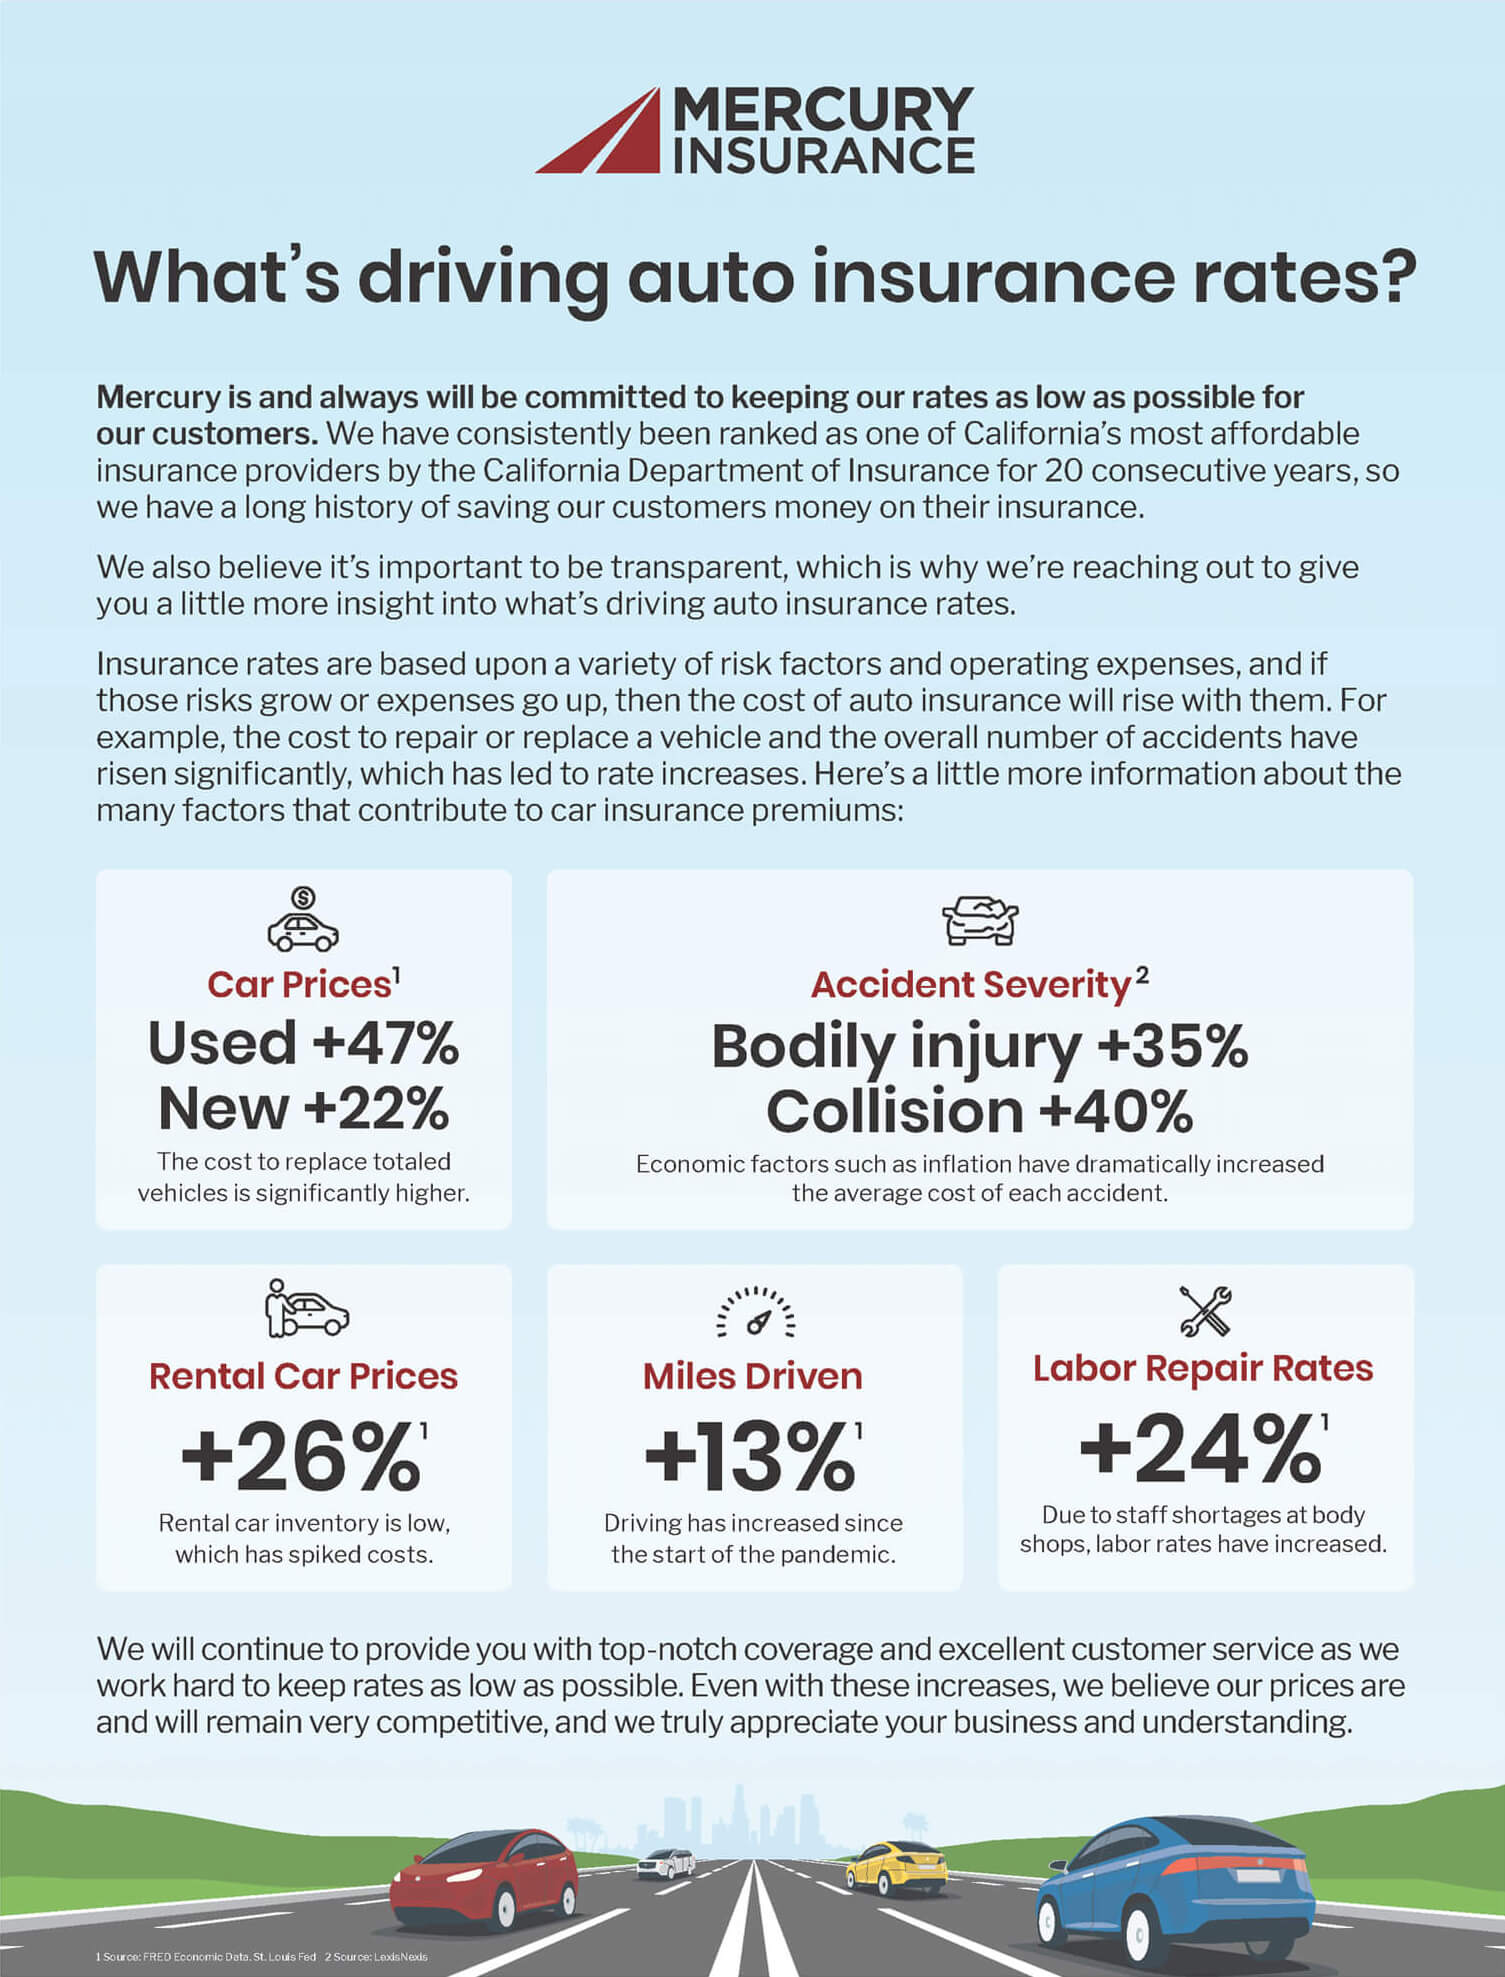 Infographic showing the top reasons that car insurance rates are increasing